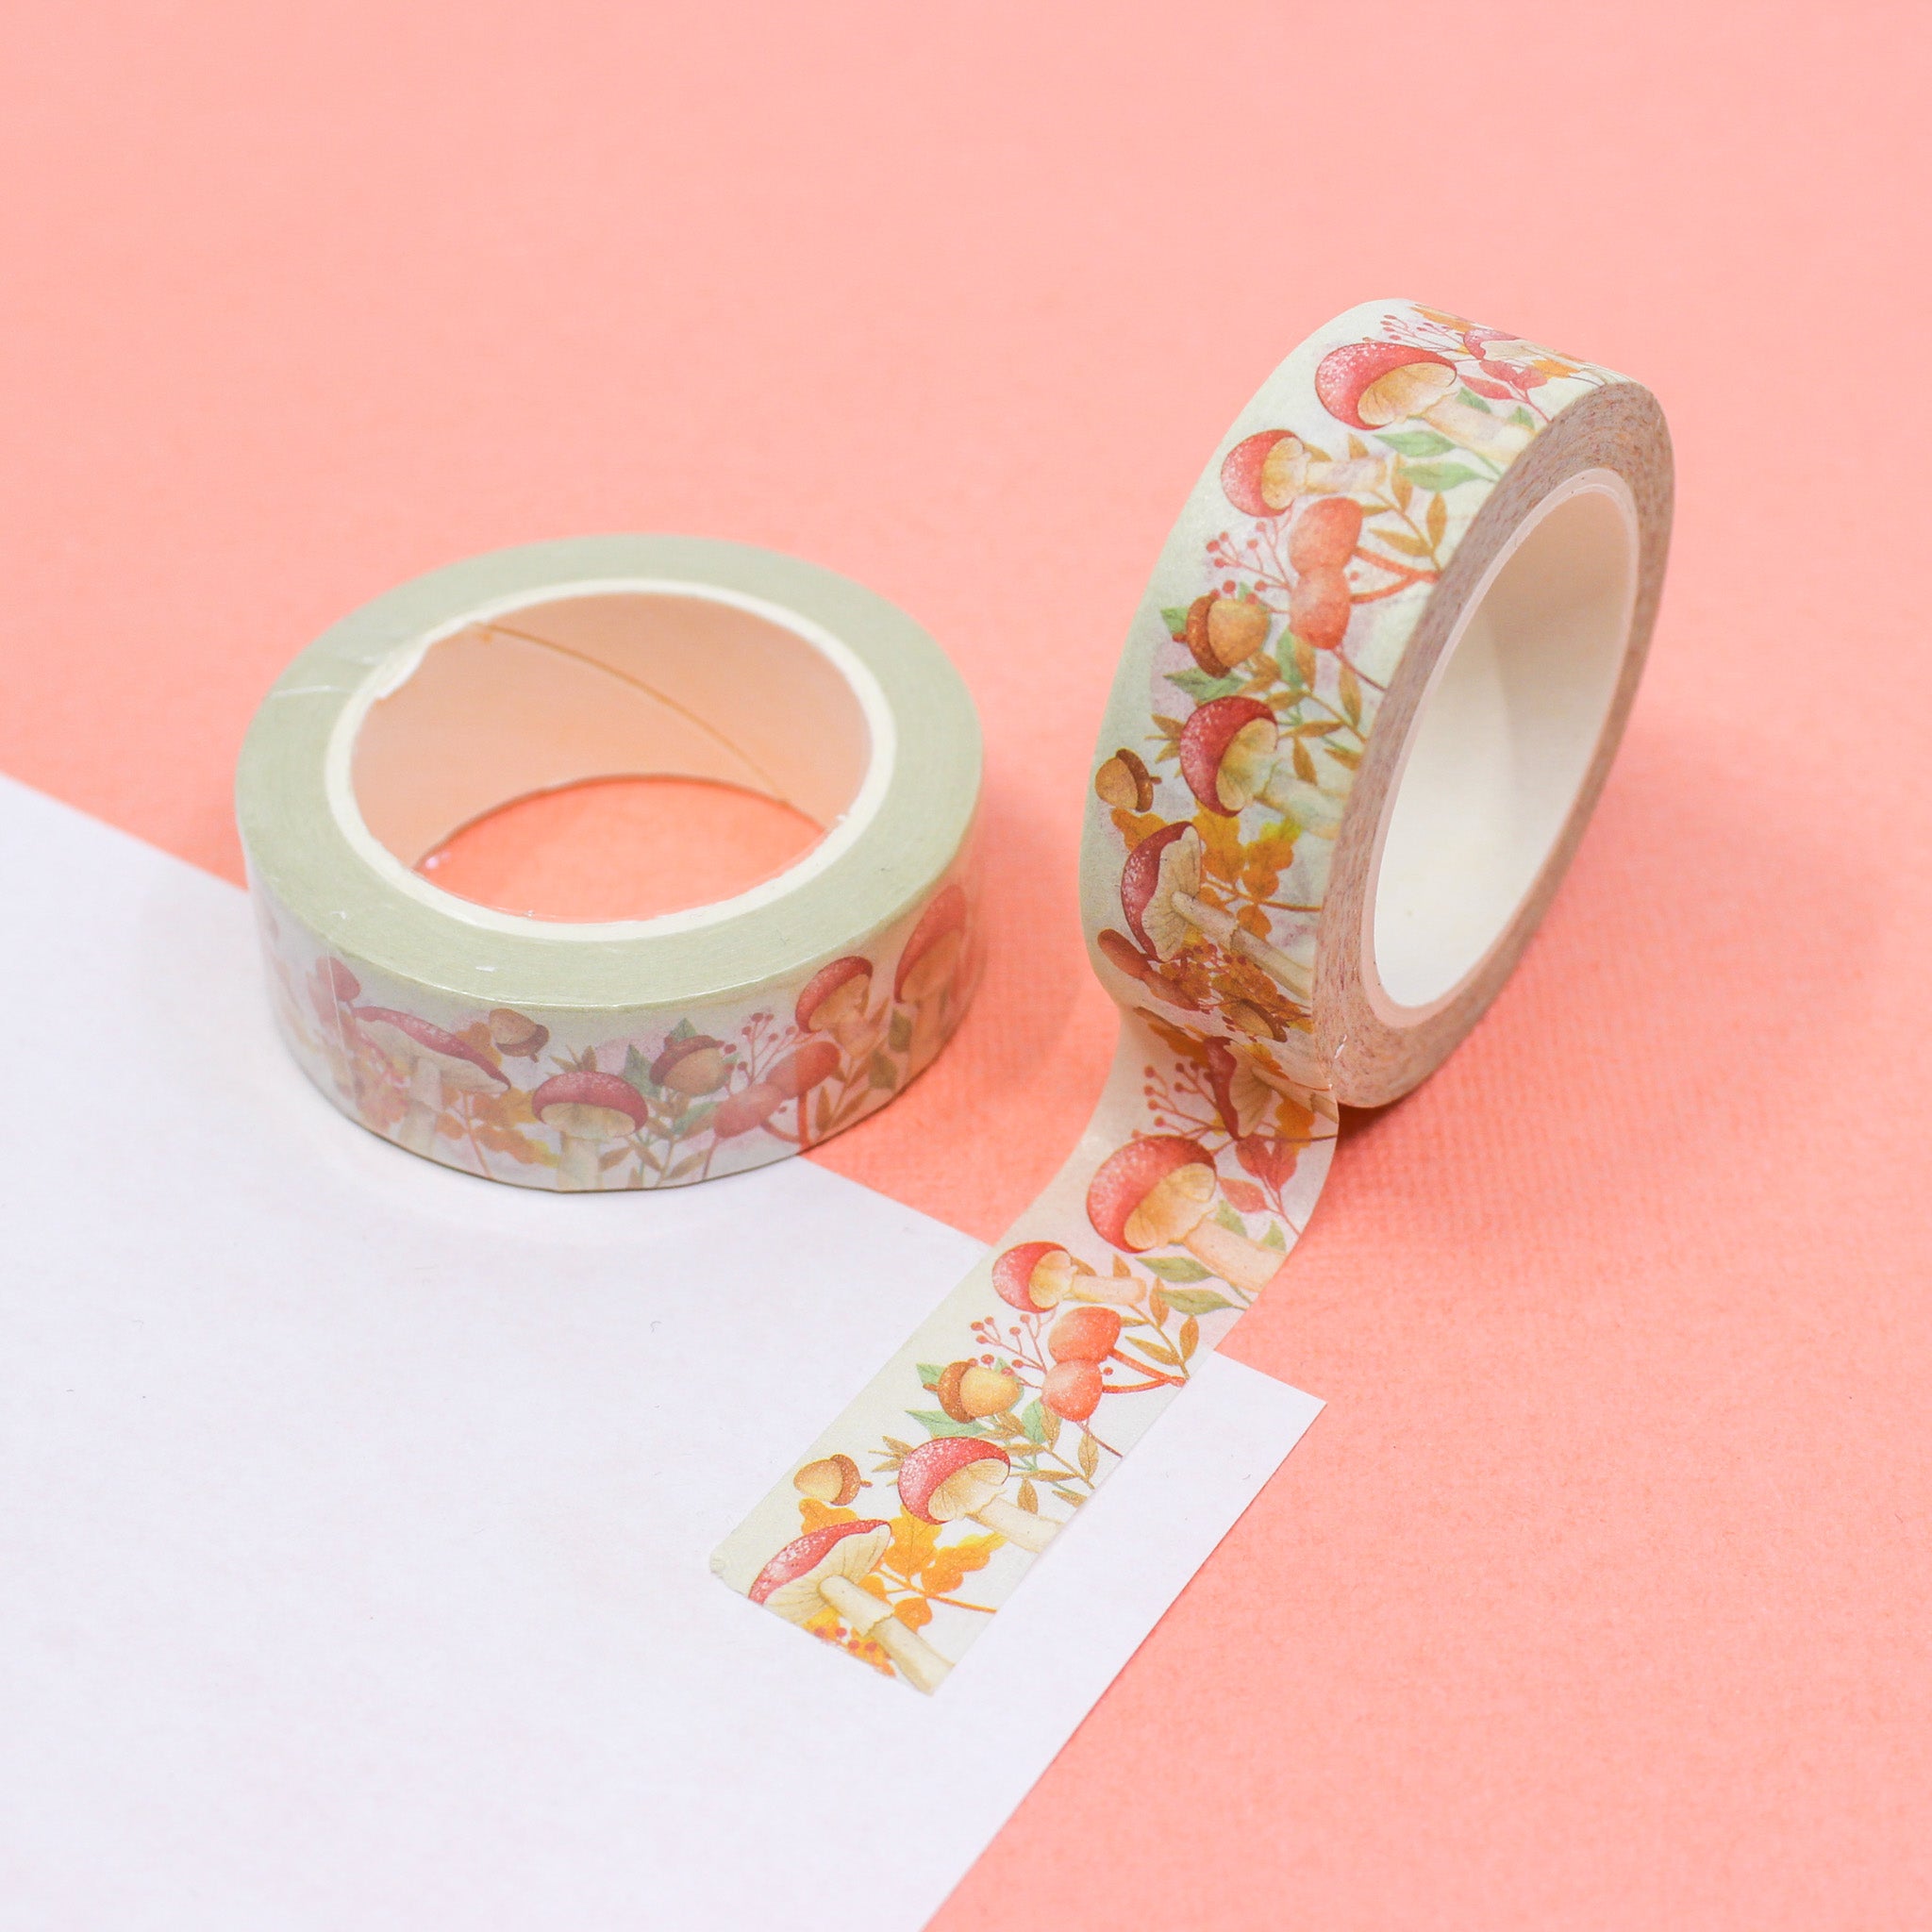 This is a bright and fun mushrooms pattern washi tape from BBB Supplies Craft Shop